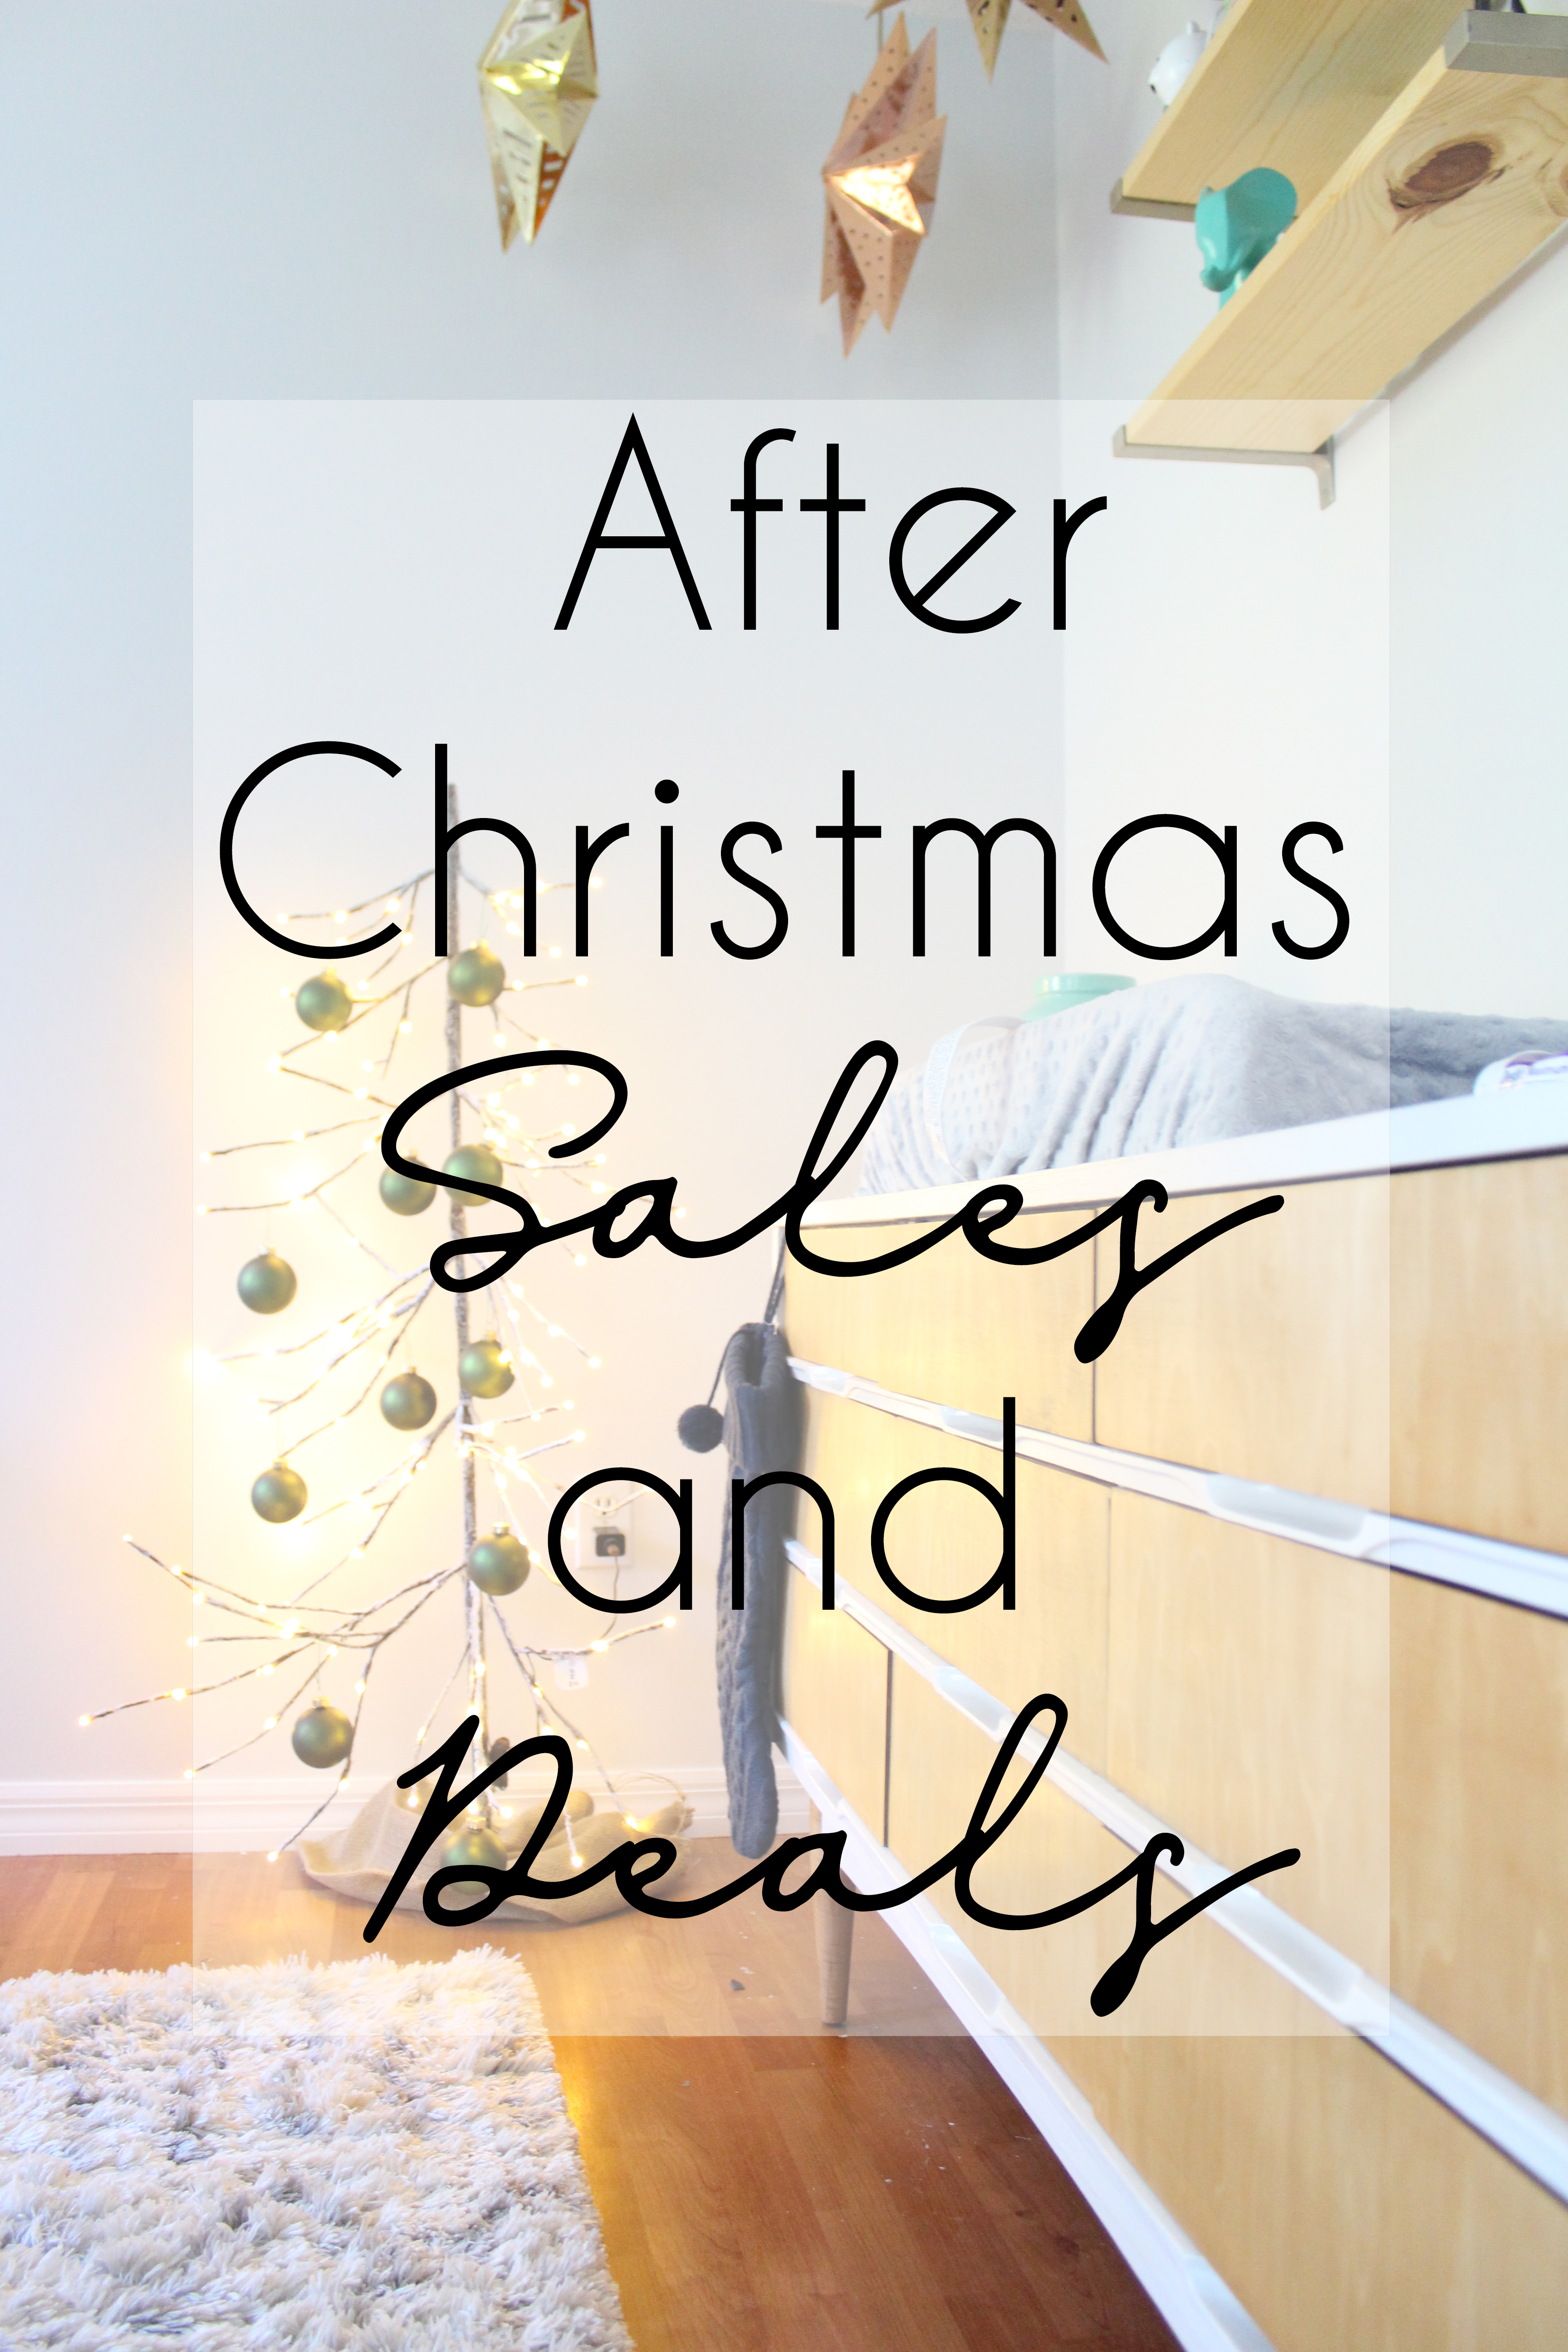 After Christmas Sales for Home Decor